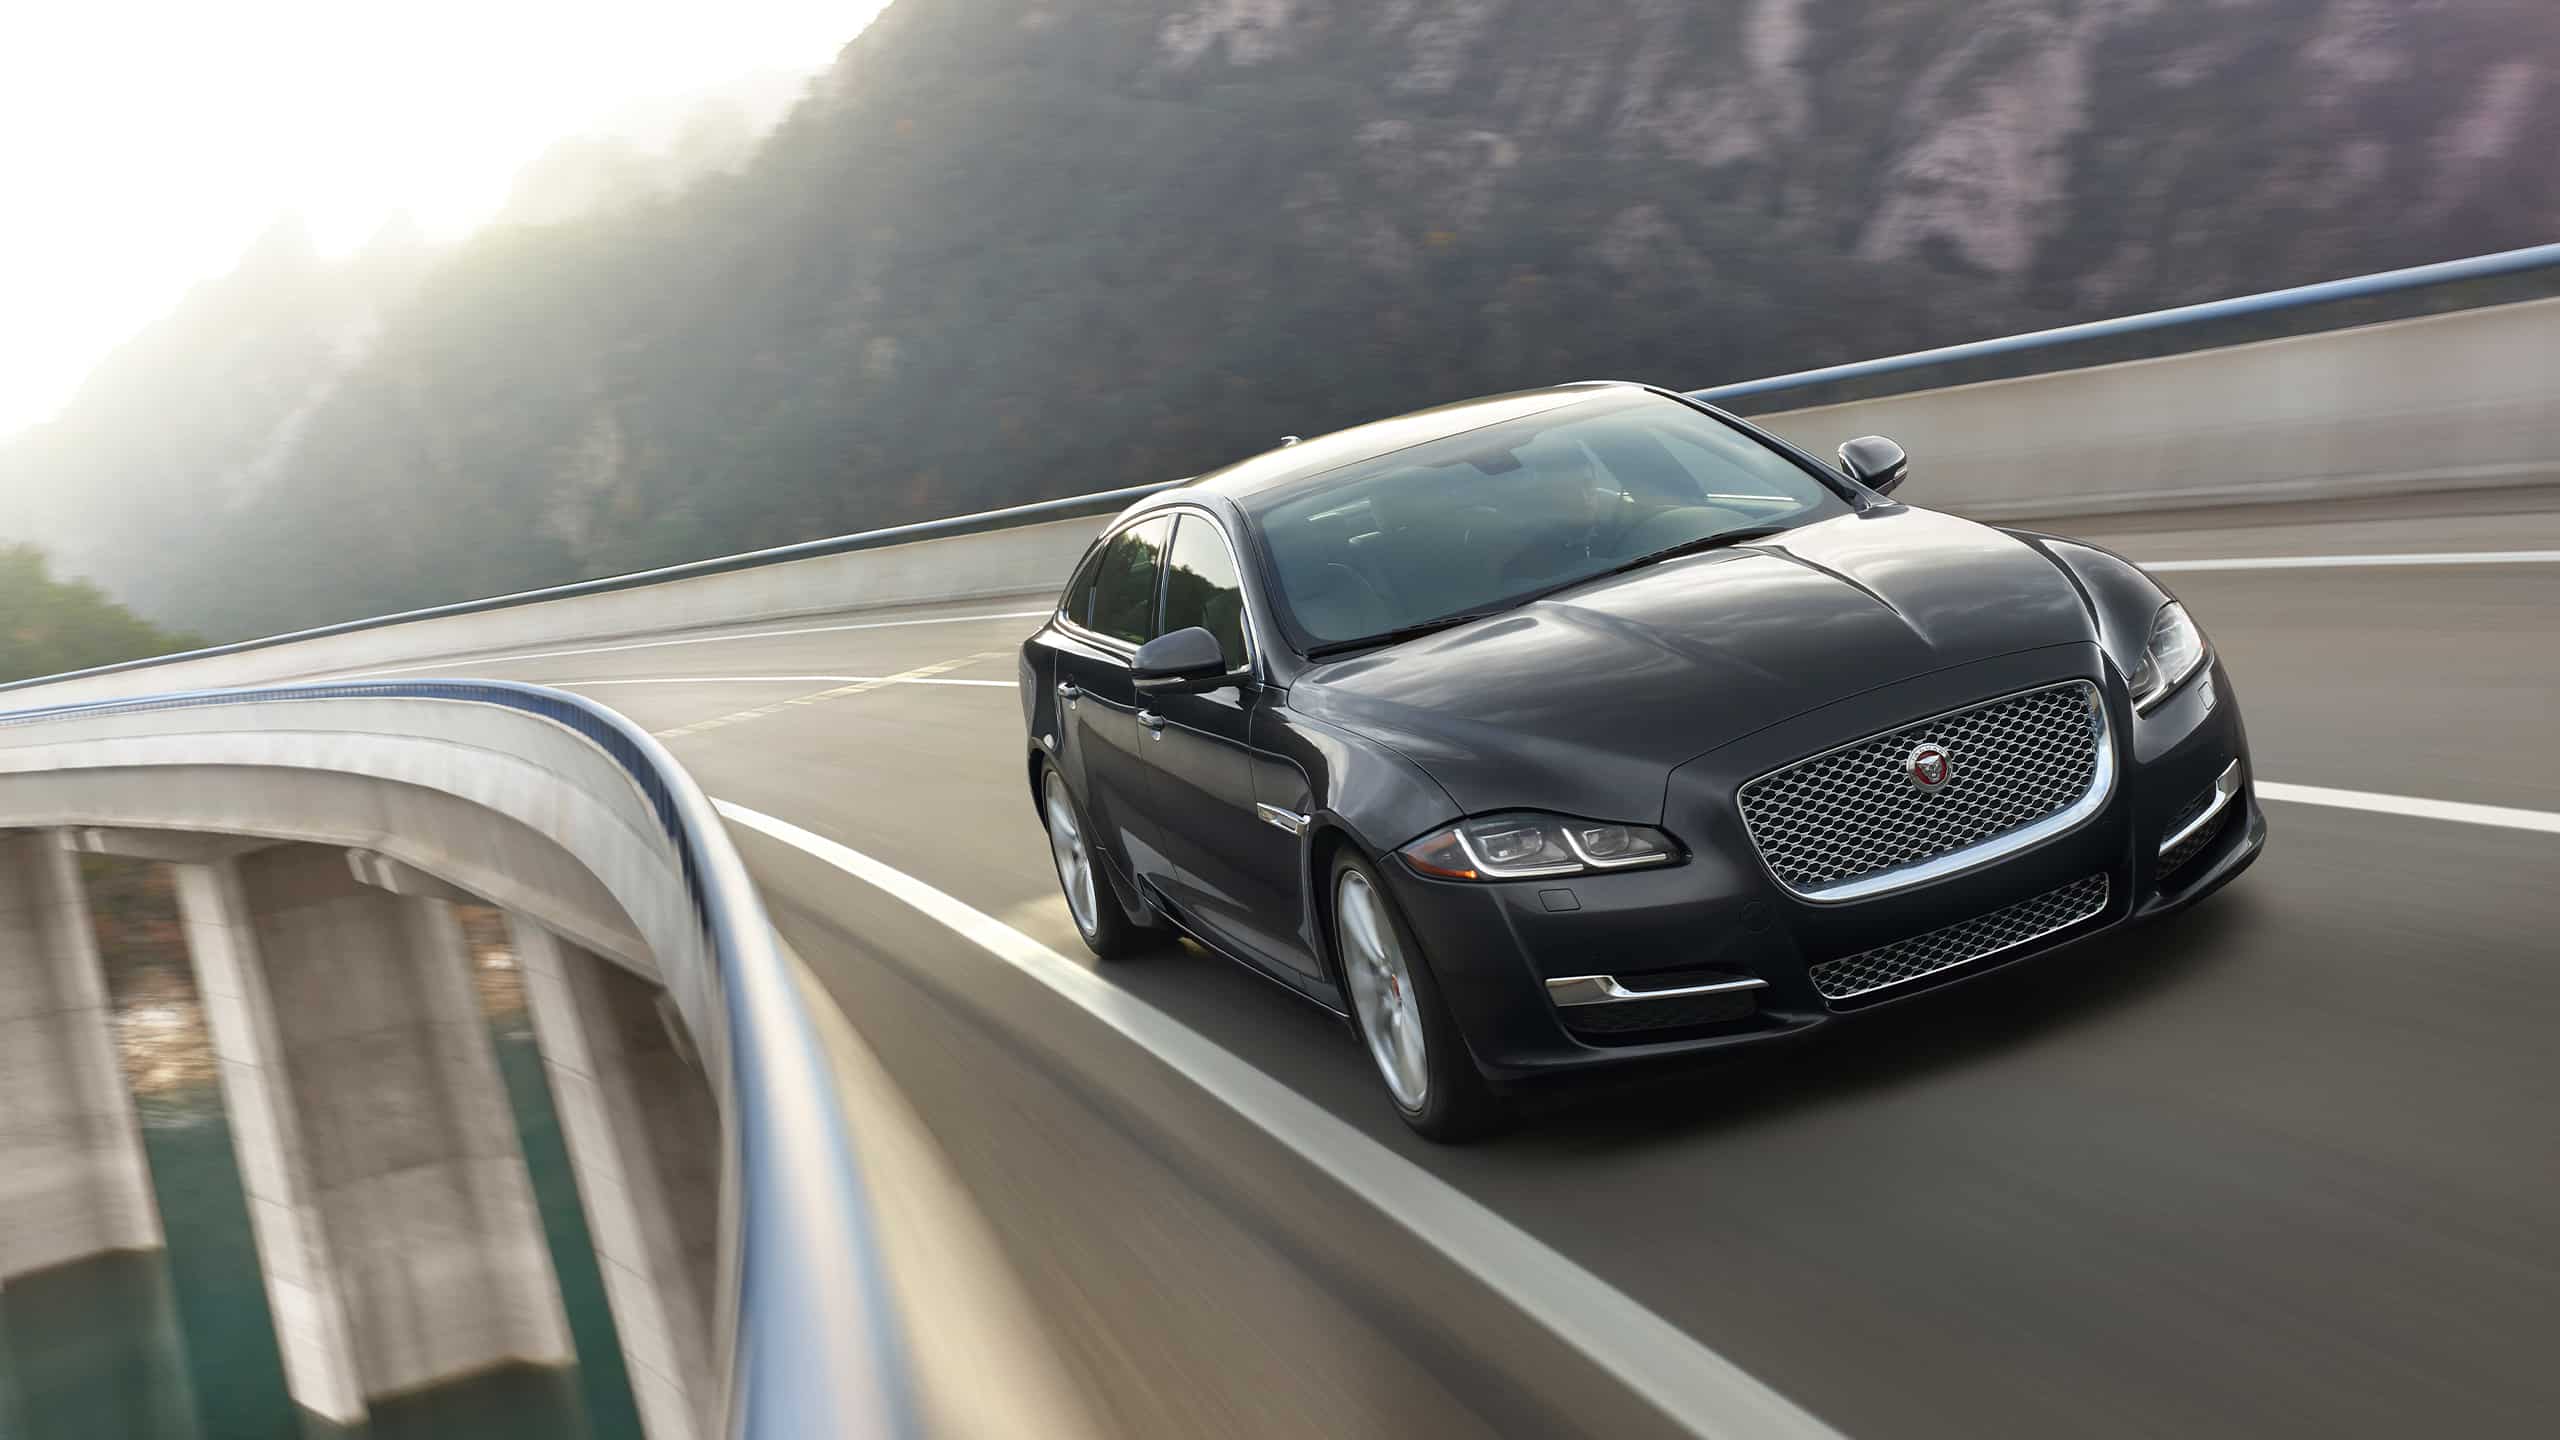 Jaguar XJ running on the bridge which is build over the river and surrounded by mountains